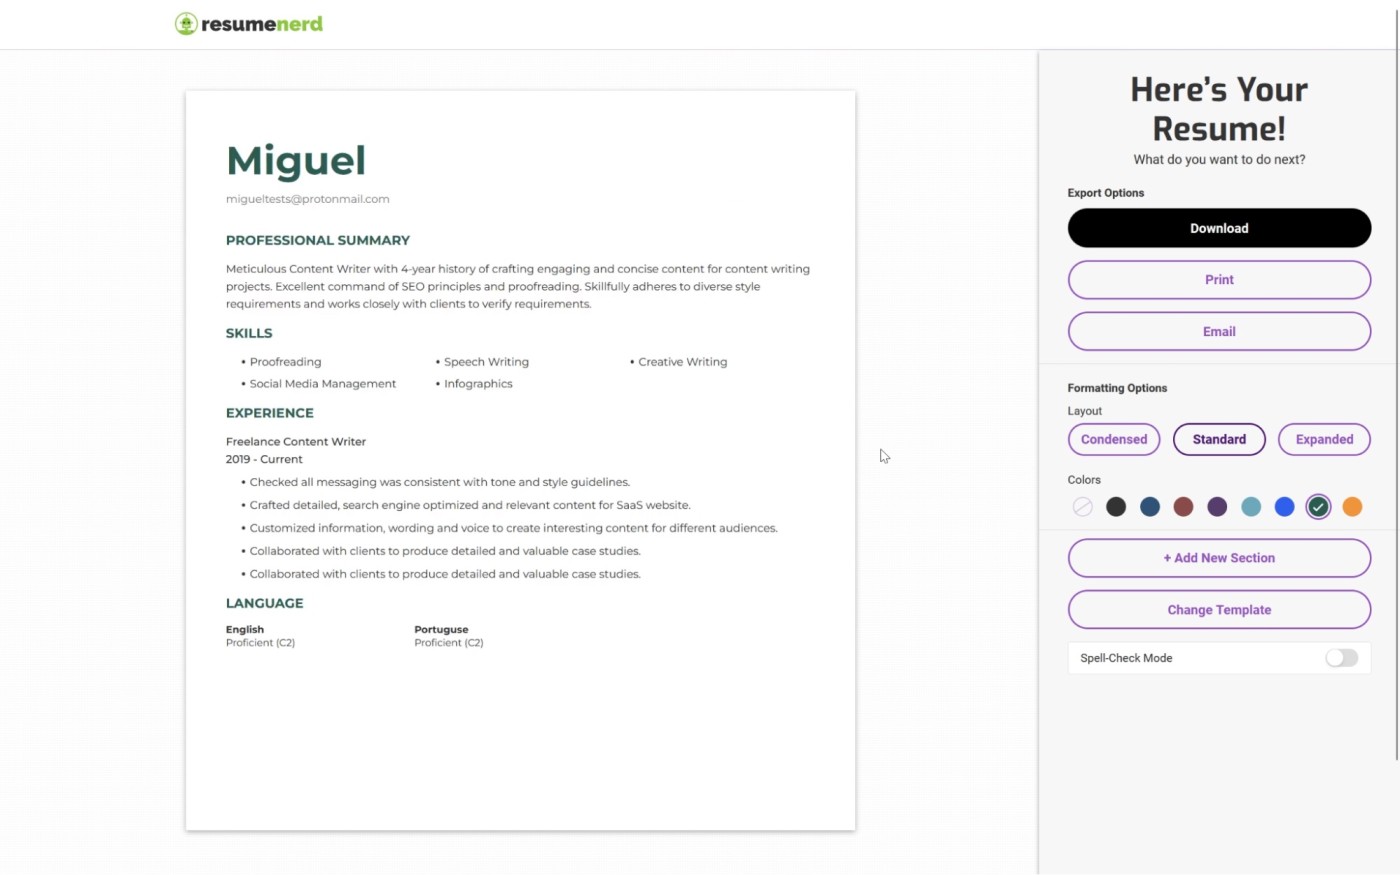 ResumeNerd, our pick for the best resume builder for adapting your resume as you browse jobs